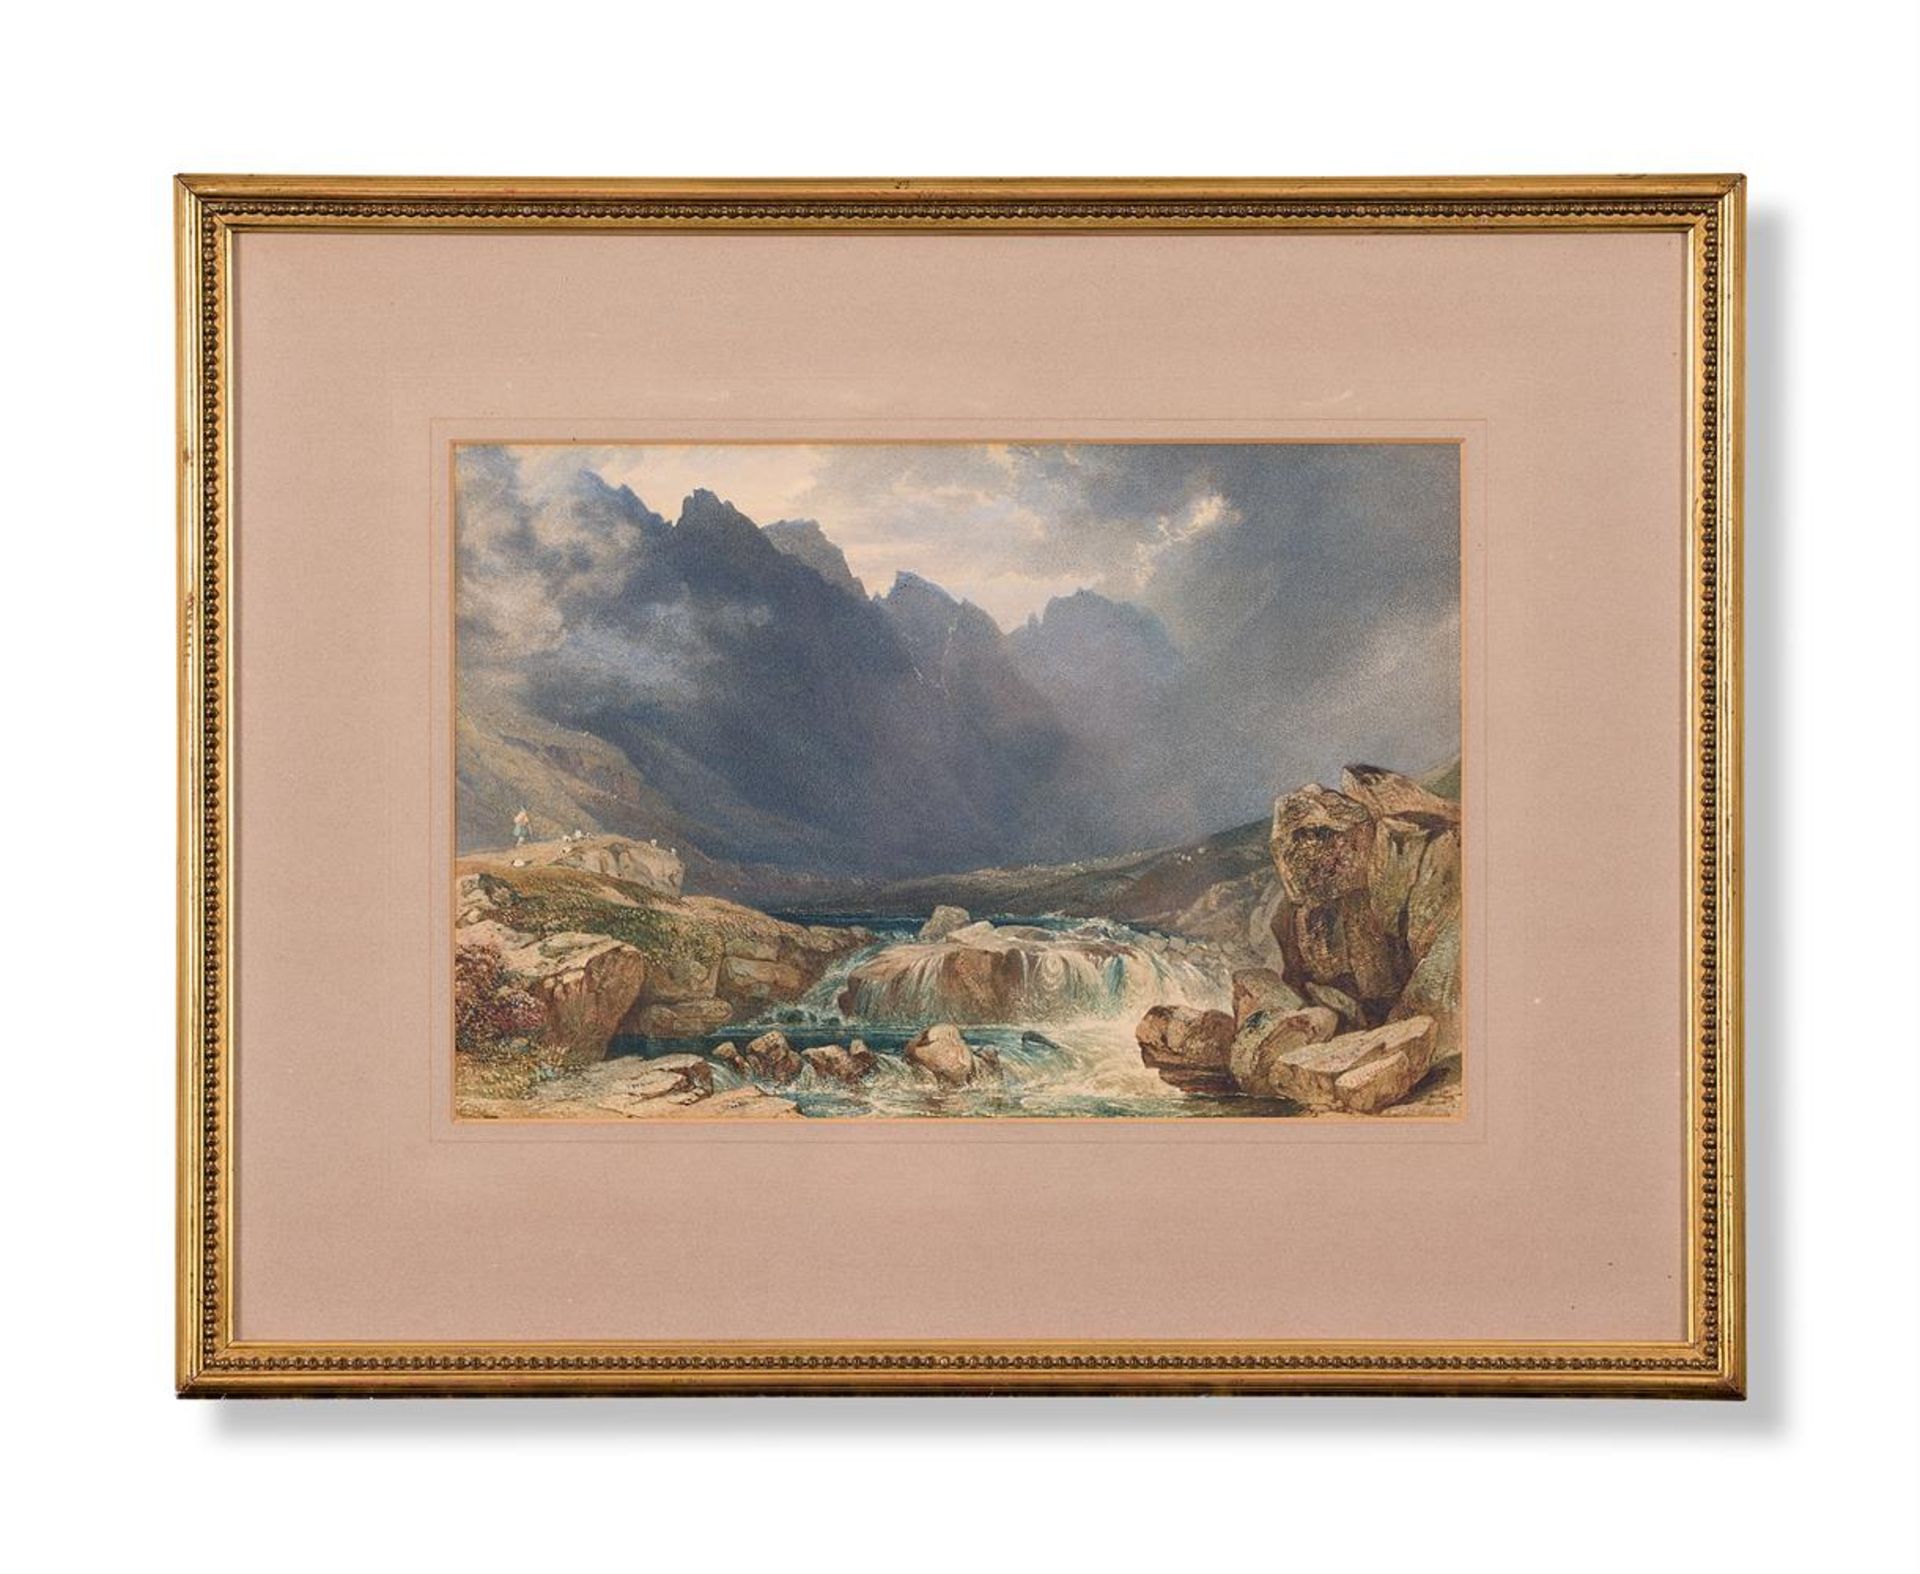 WILLIAM ANDREWS NESFIELD (BRITISH 1793-1881), A MOUNTAINOUS LANDSCAPE WITH A RIVER IN SPATE